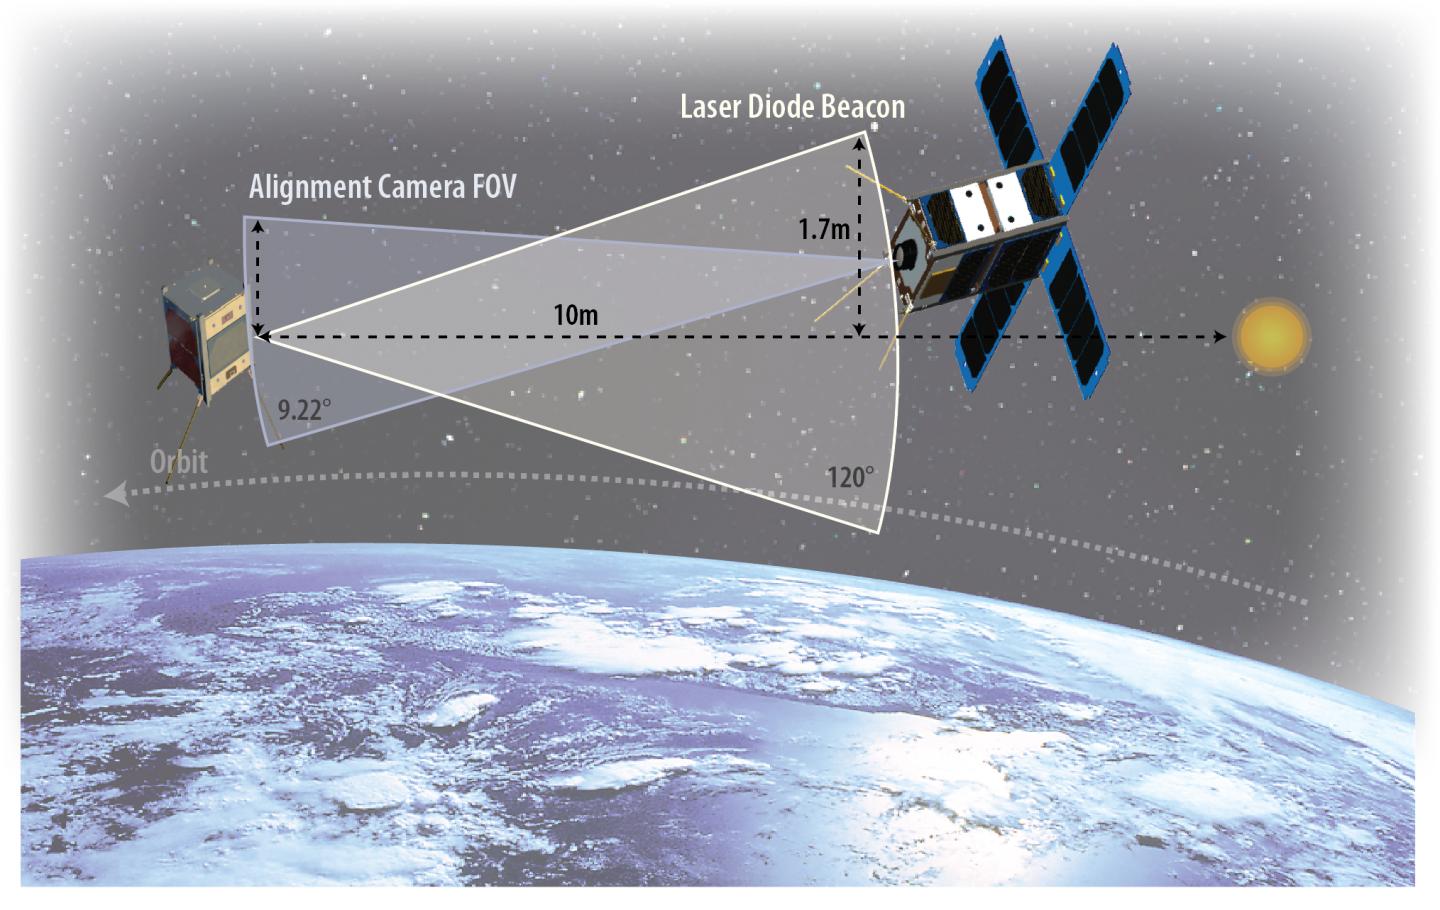 How CANYVAL-X's 2 CubeSats Will Align in Orbit